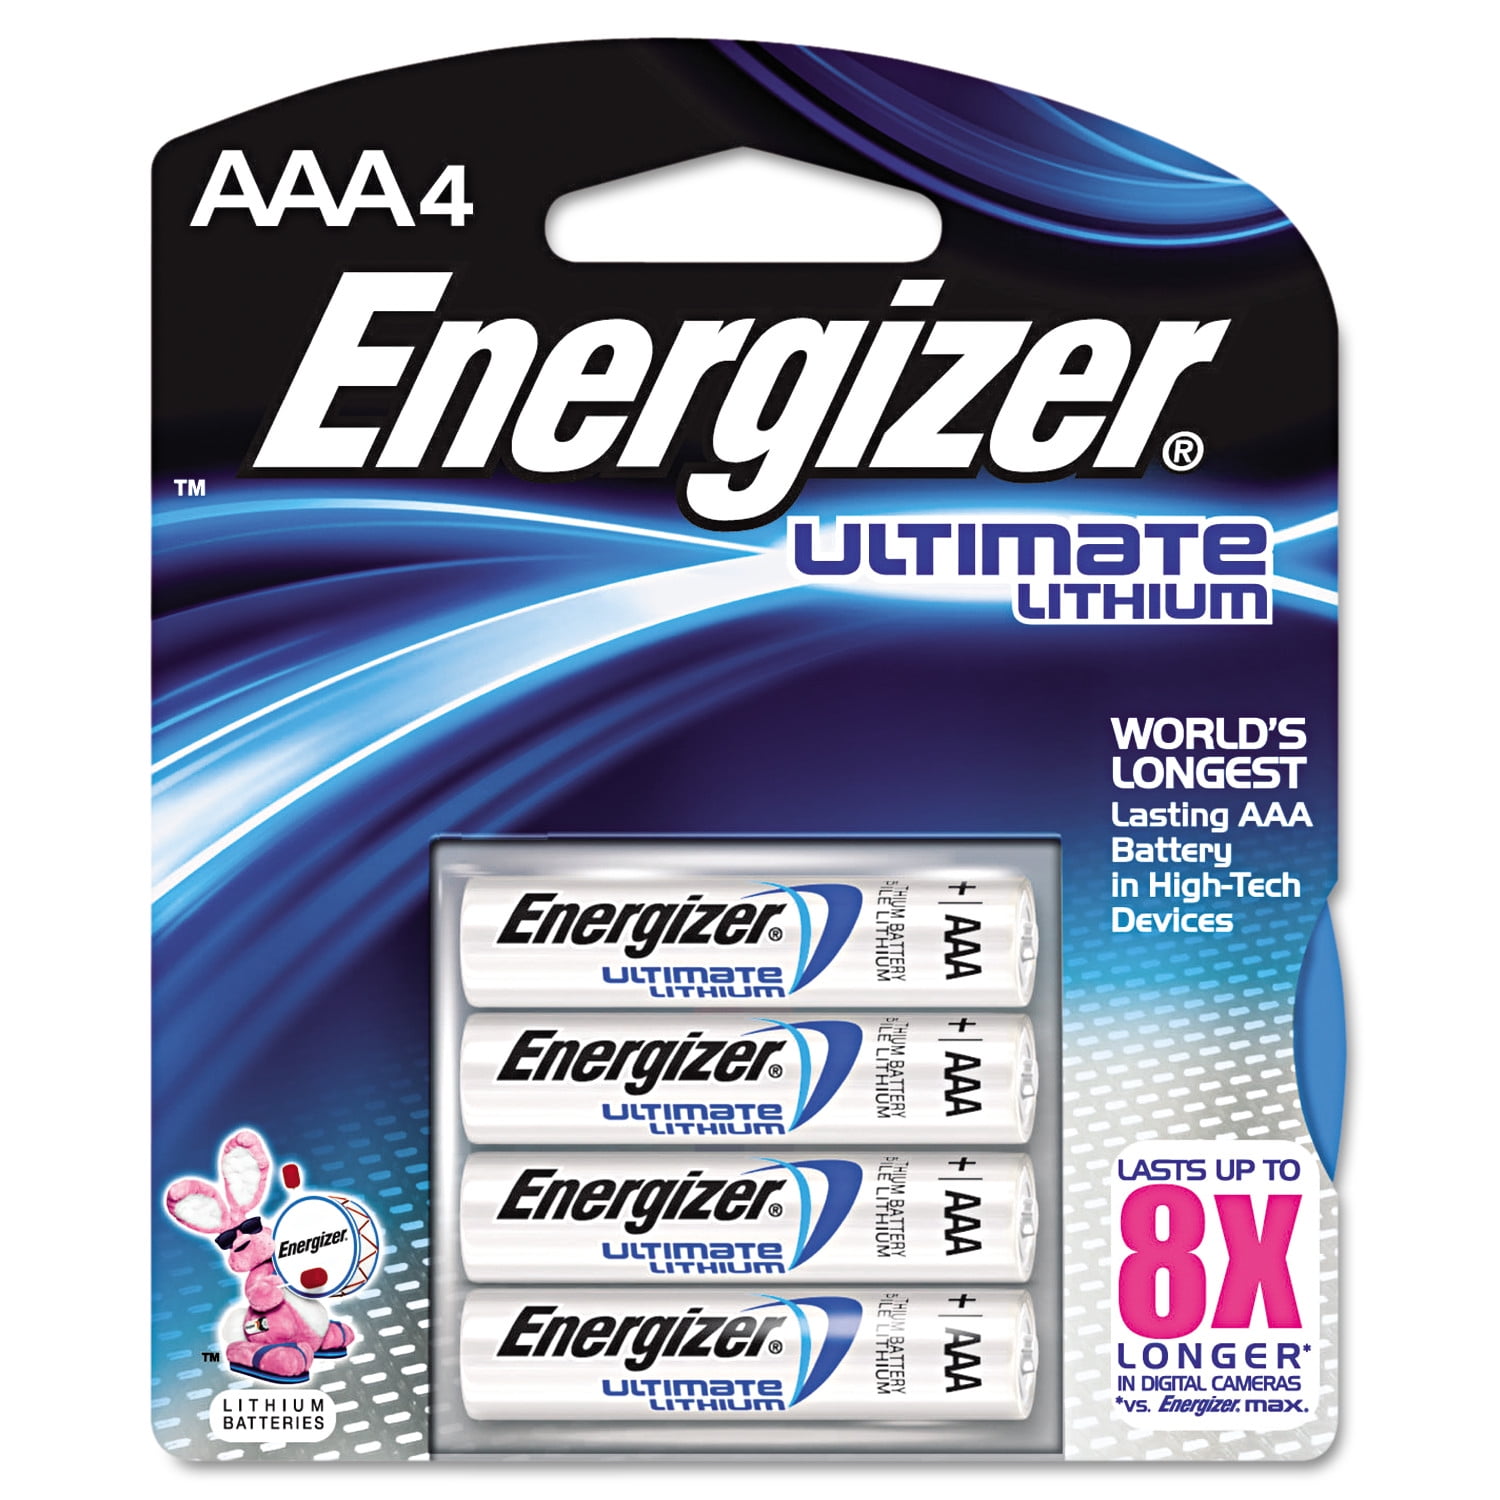 Aaa battery. Energizer Ultimate Lithium fr6. Батарейка Energizer Lithium. Батарейка Energizer Ultimate Lithium AAA. Батарейка Energizer АА 2шт.